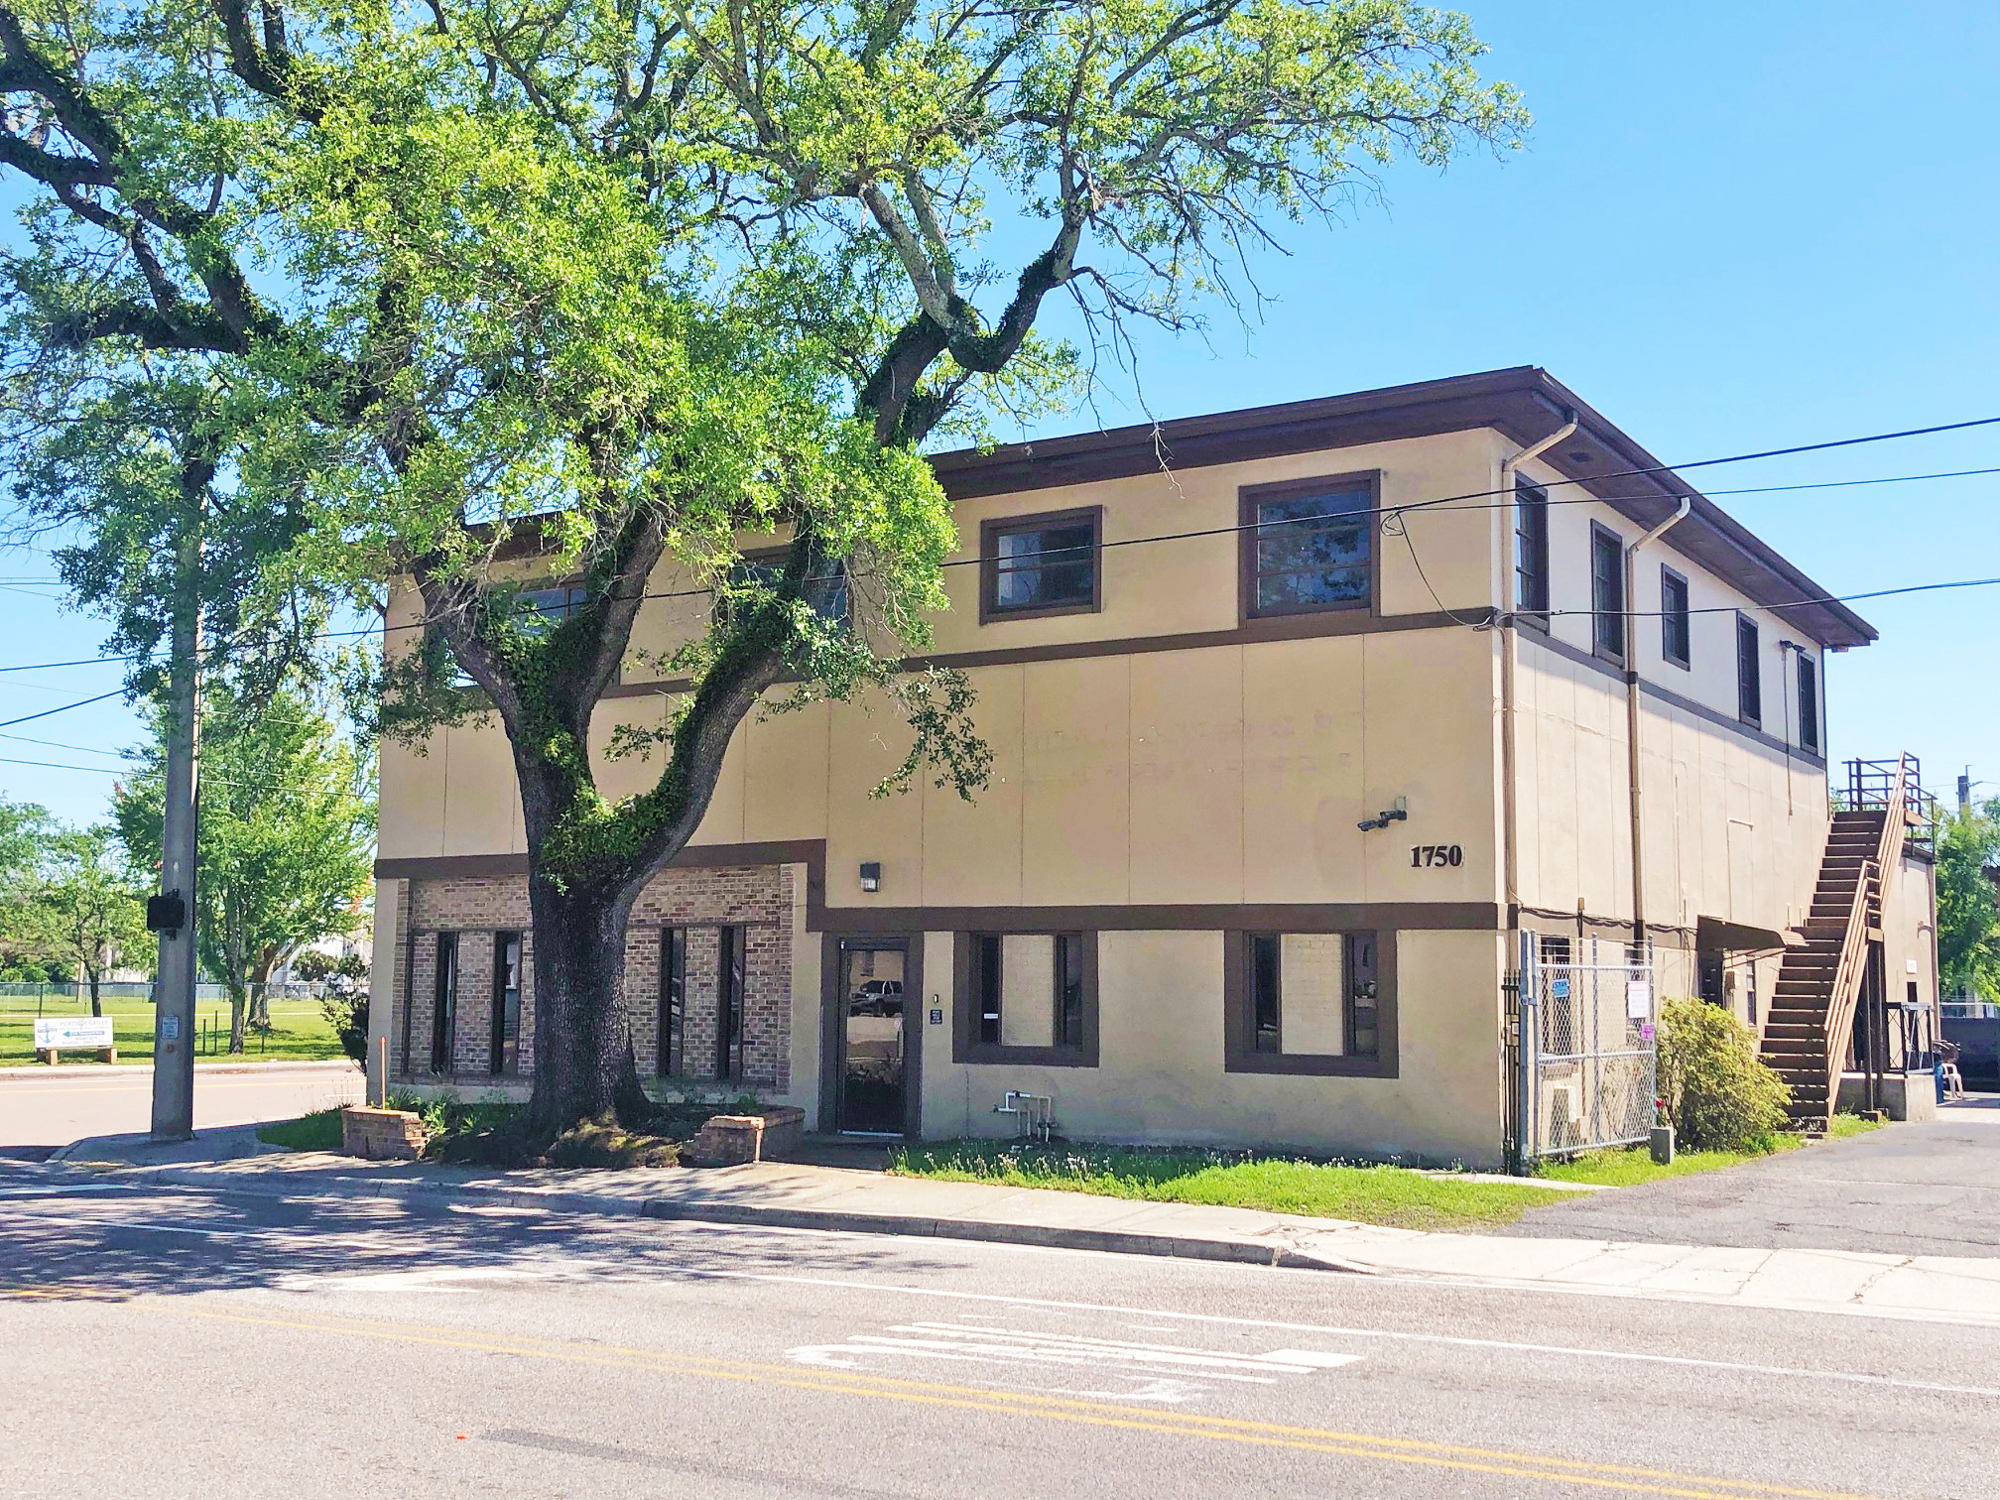 Jesse and Brittany Culbreth plan to transform this vacant two-story into the new headquarters for Emerald C’s Development Inc.